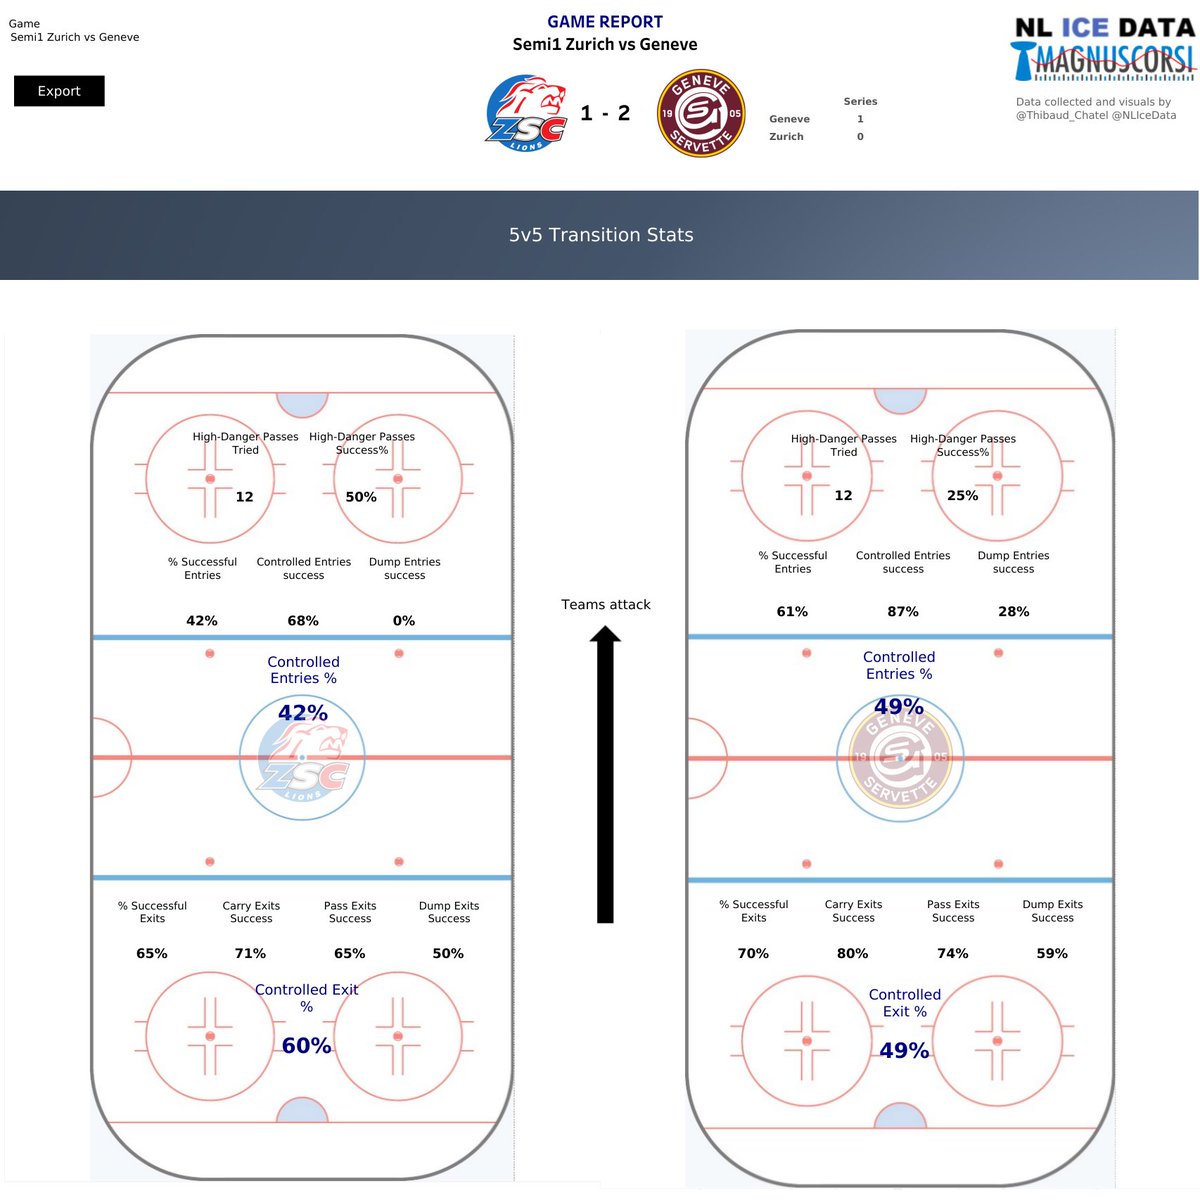  Transition Report 2/2Zone Entries were tough for both teams, defenses closed their blue line very well. 42% controlled entries for ZSC (48% this season)49% for Geneva compared to 47% this seasonNot many high danger passes, with just 25% completion for Geneva